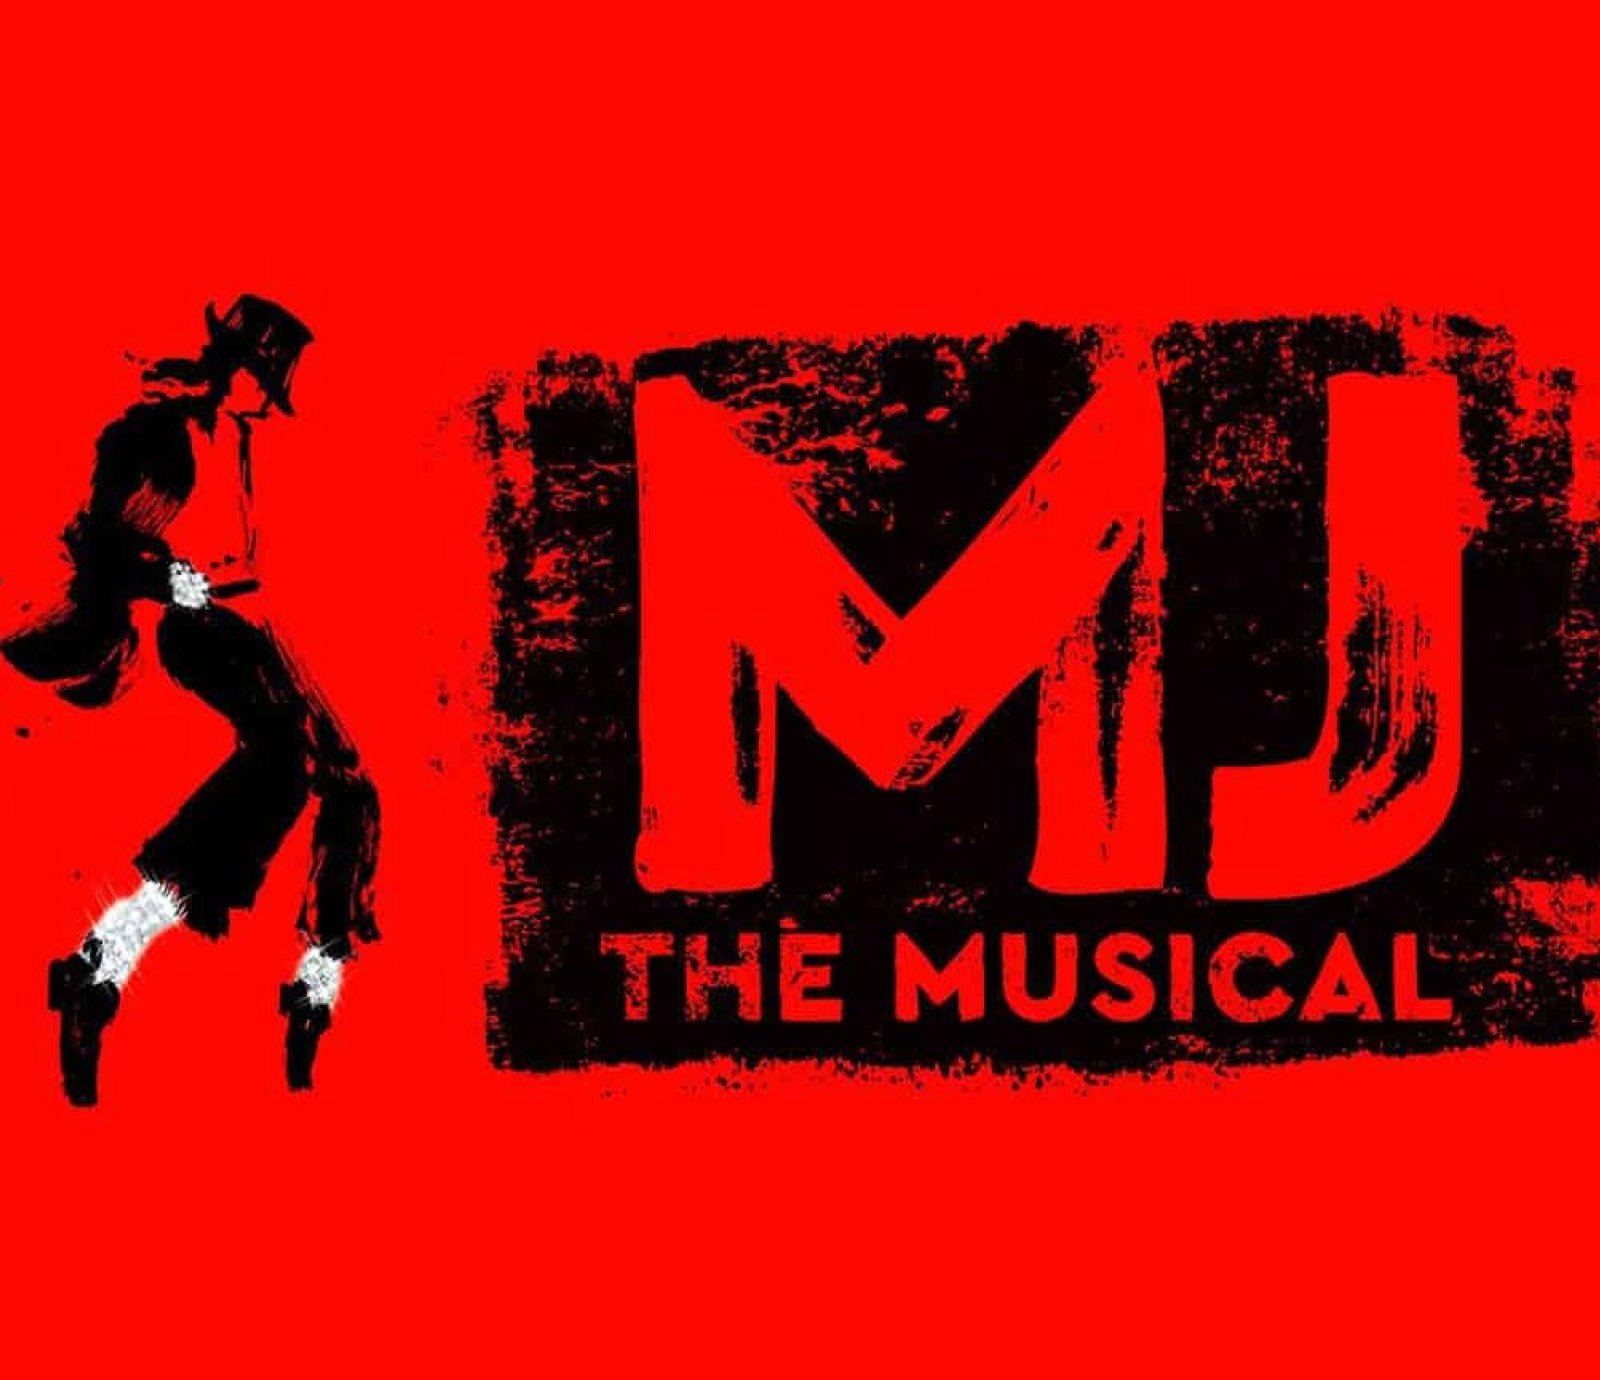 Mj The Musical